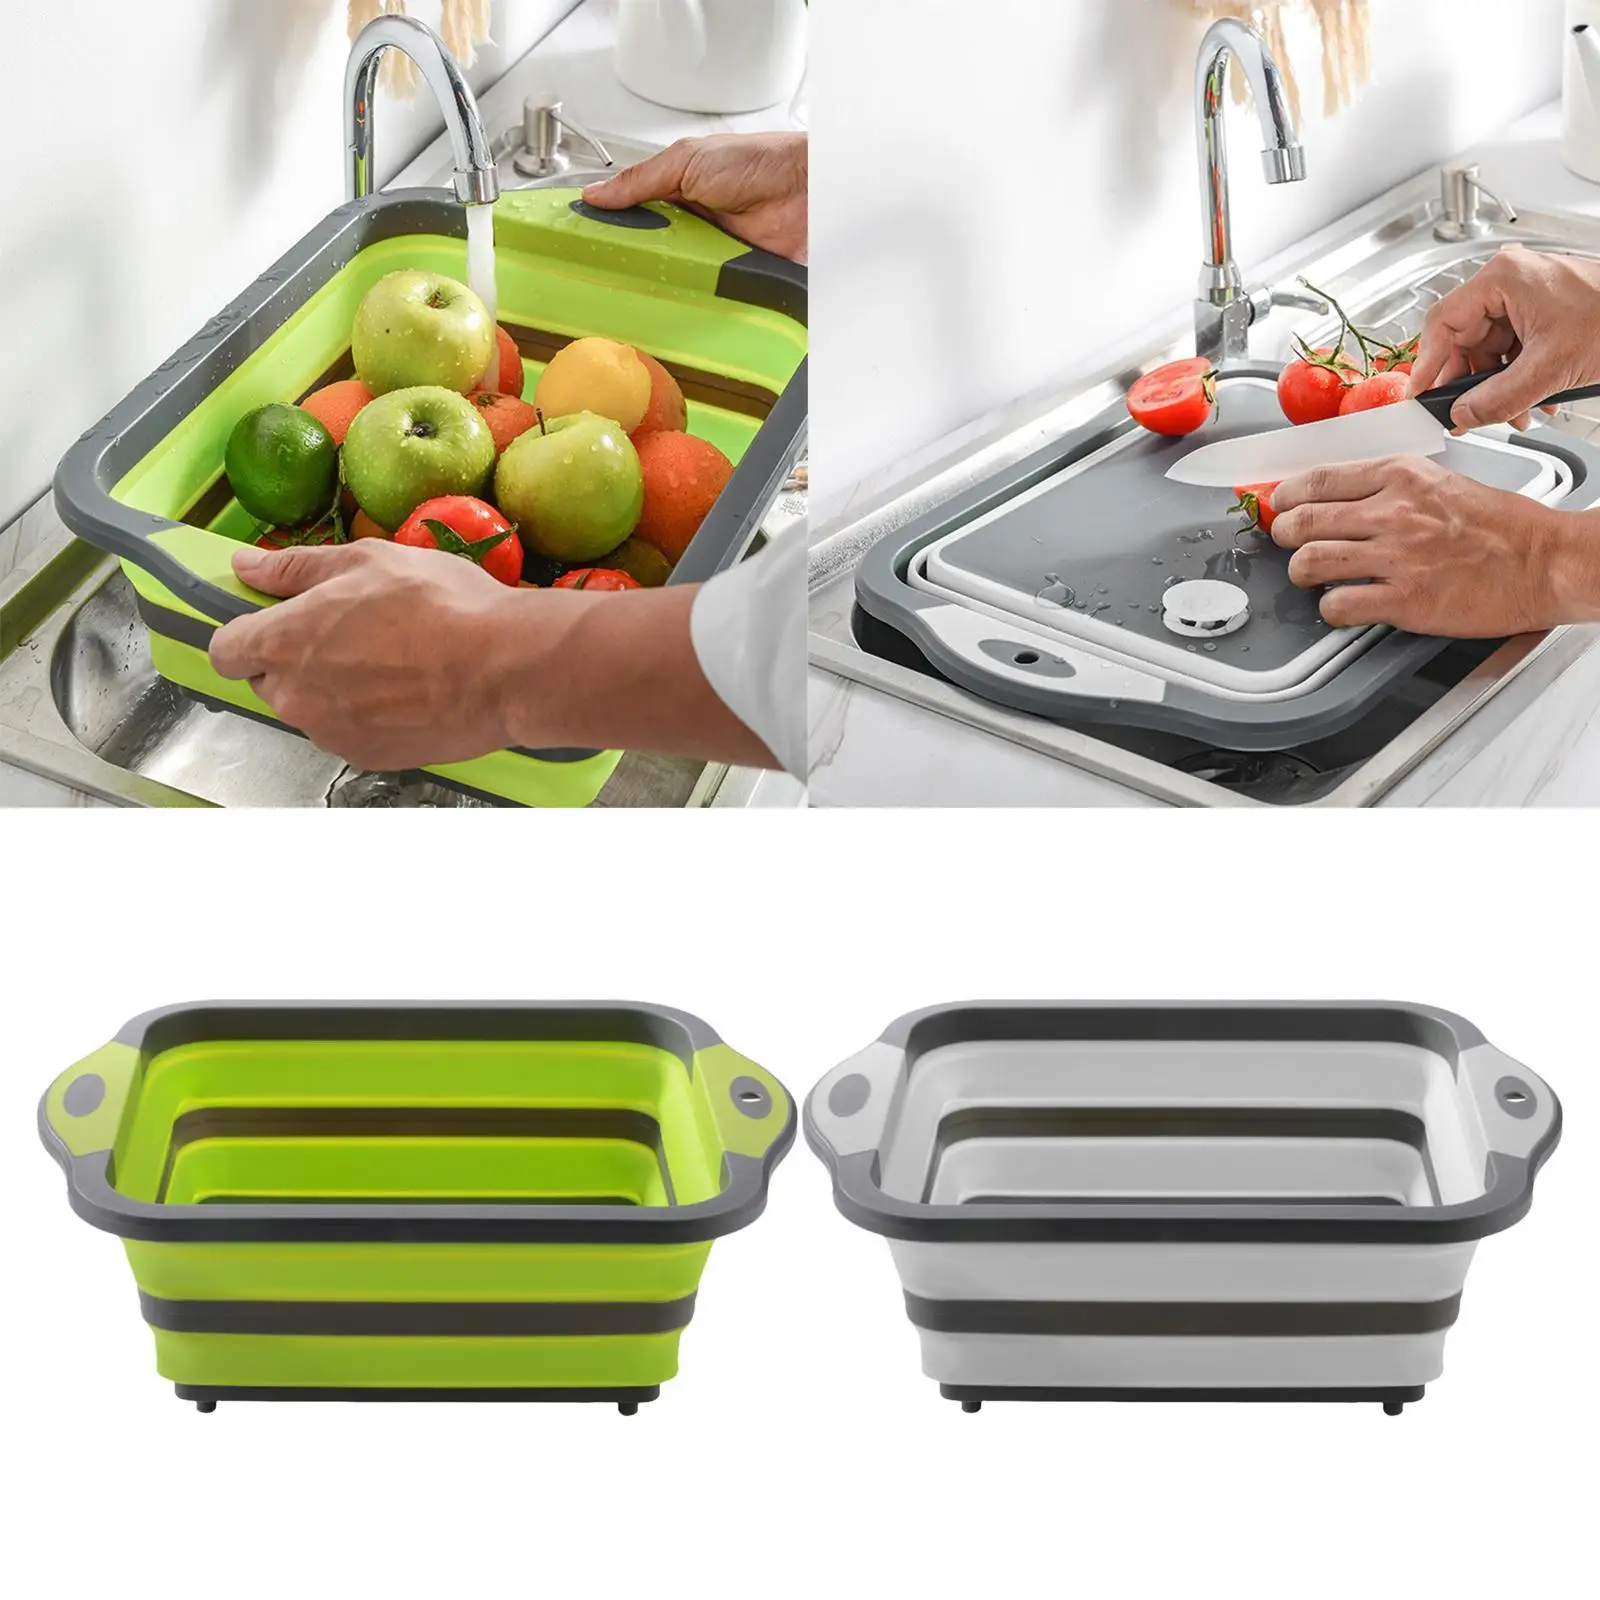 Multifunction Collapsible Cutting Board Kitchen Washing Fruits Sink Basket Space Saving for Indoor Outdoor